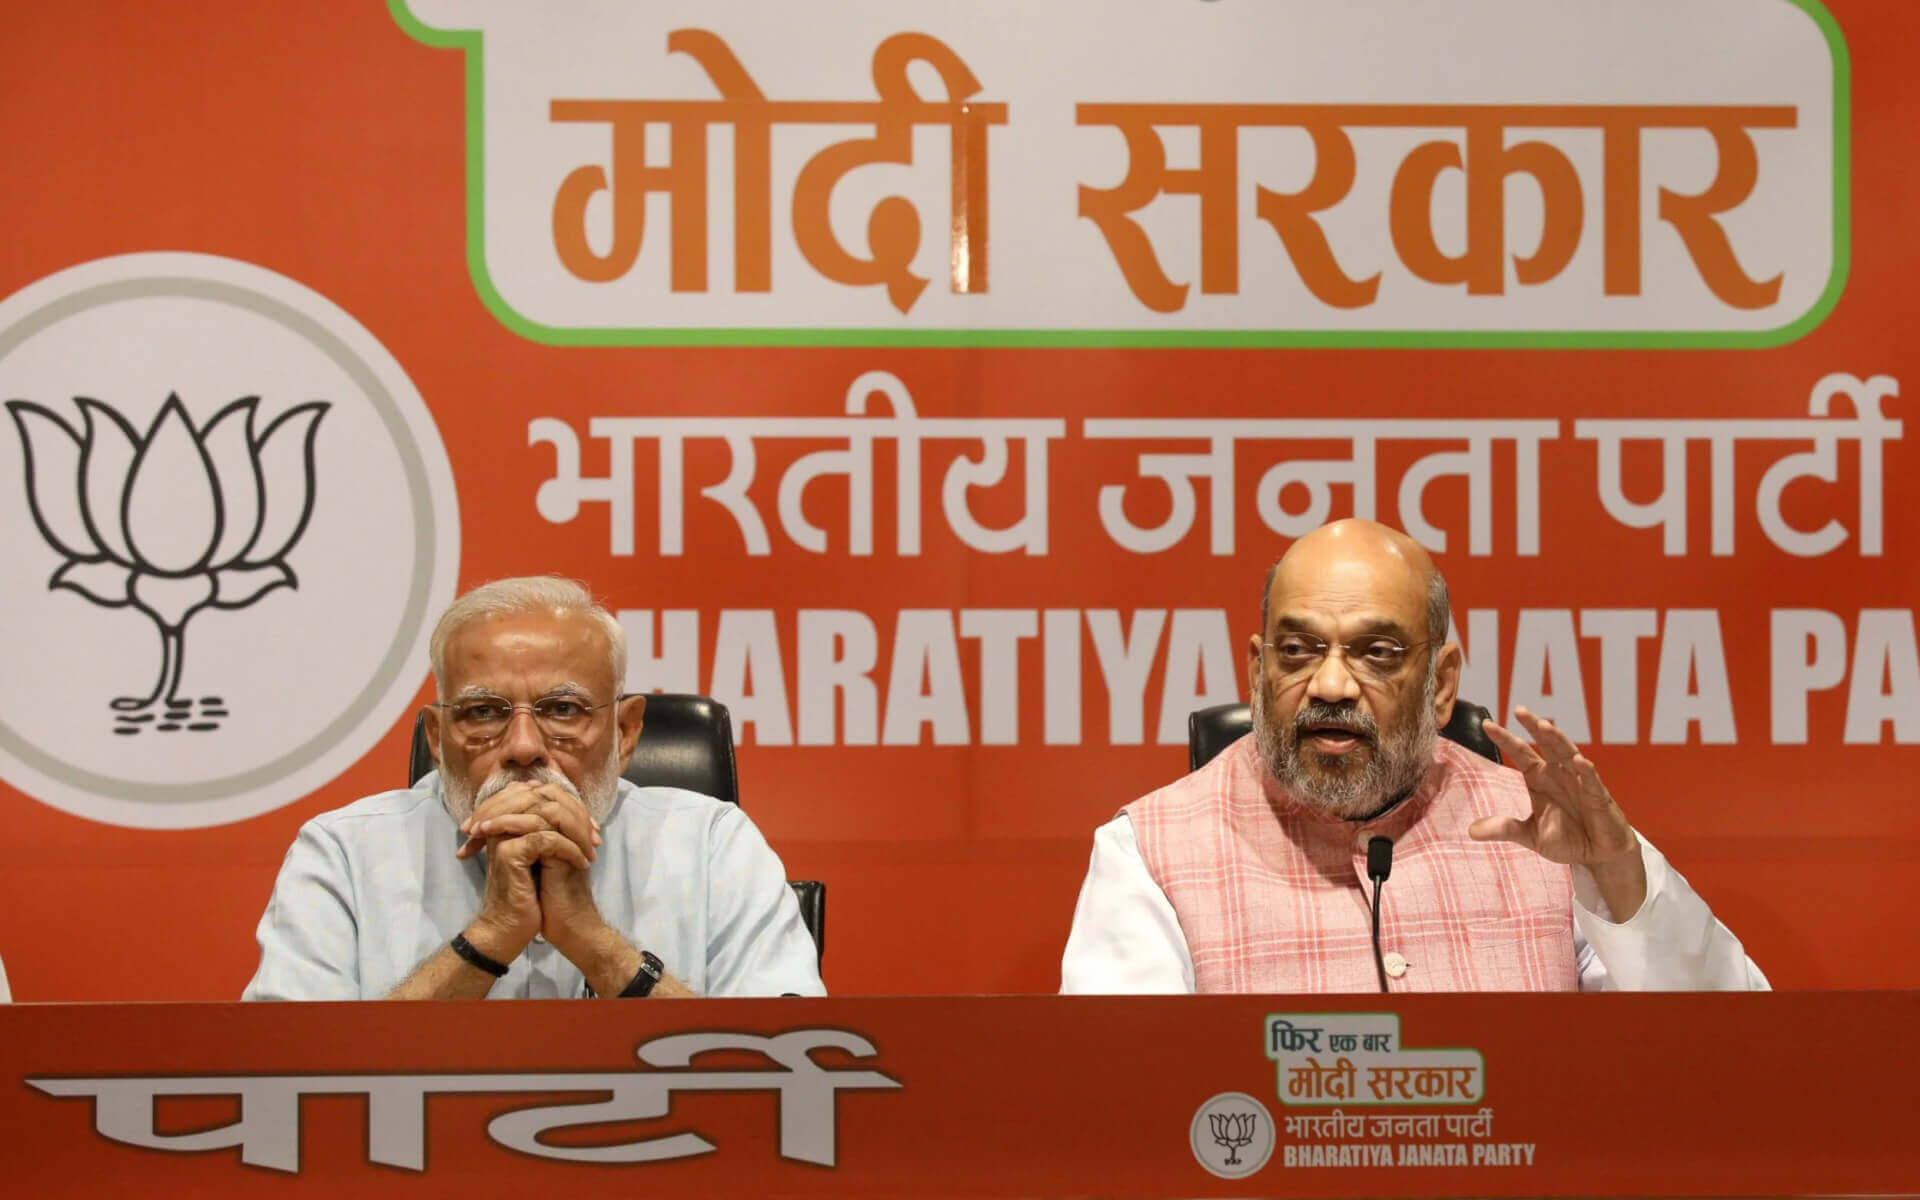 PM Modi Has Held Just One Press Conference in Six Years. What Does This Mean for India?